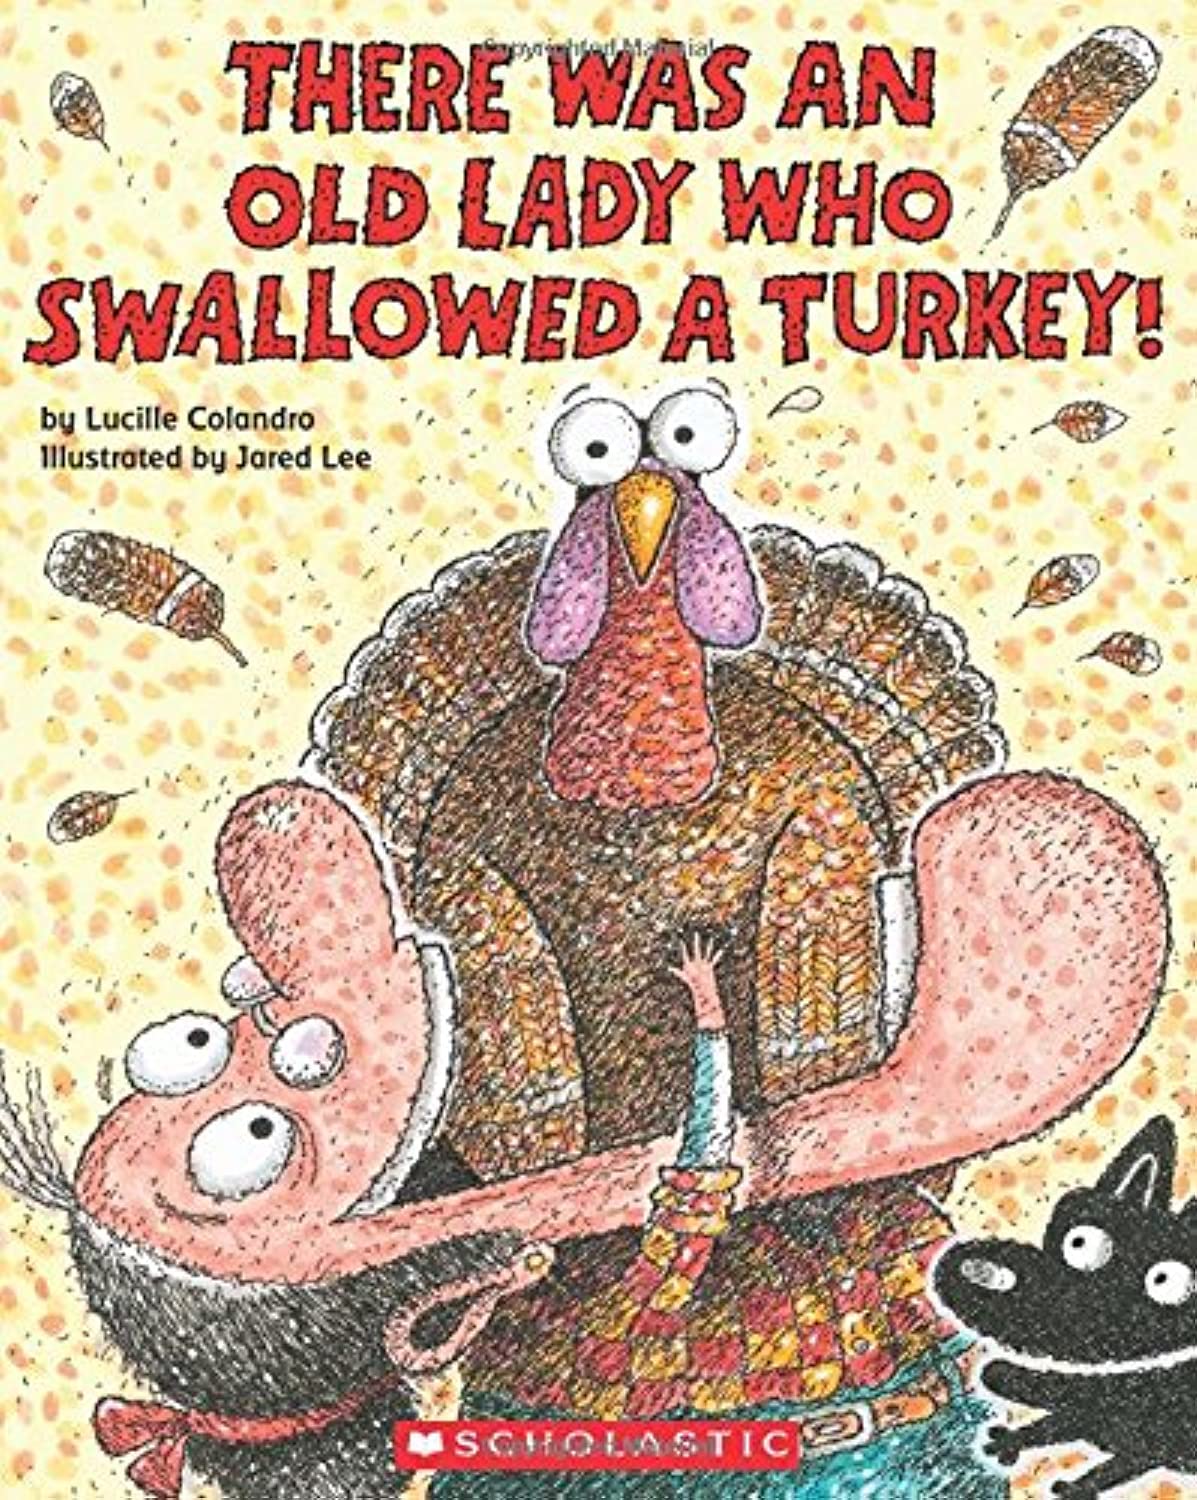 the old lady who swallowed a turkey book